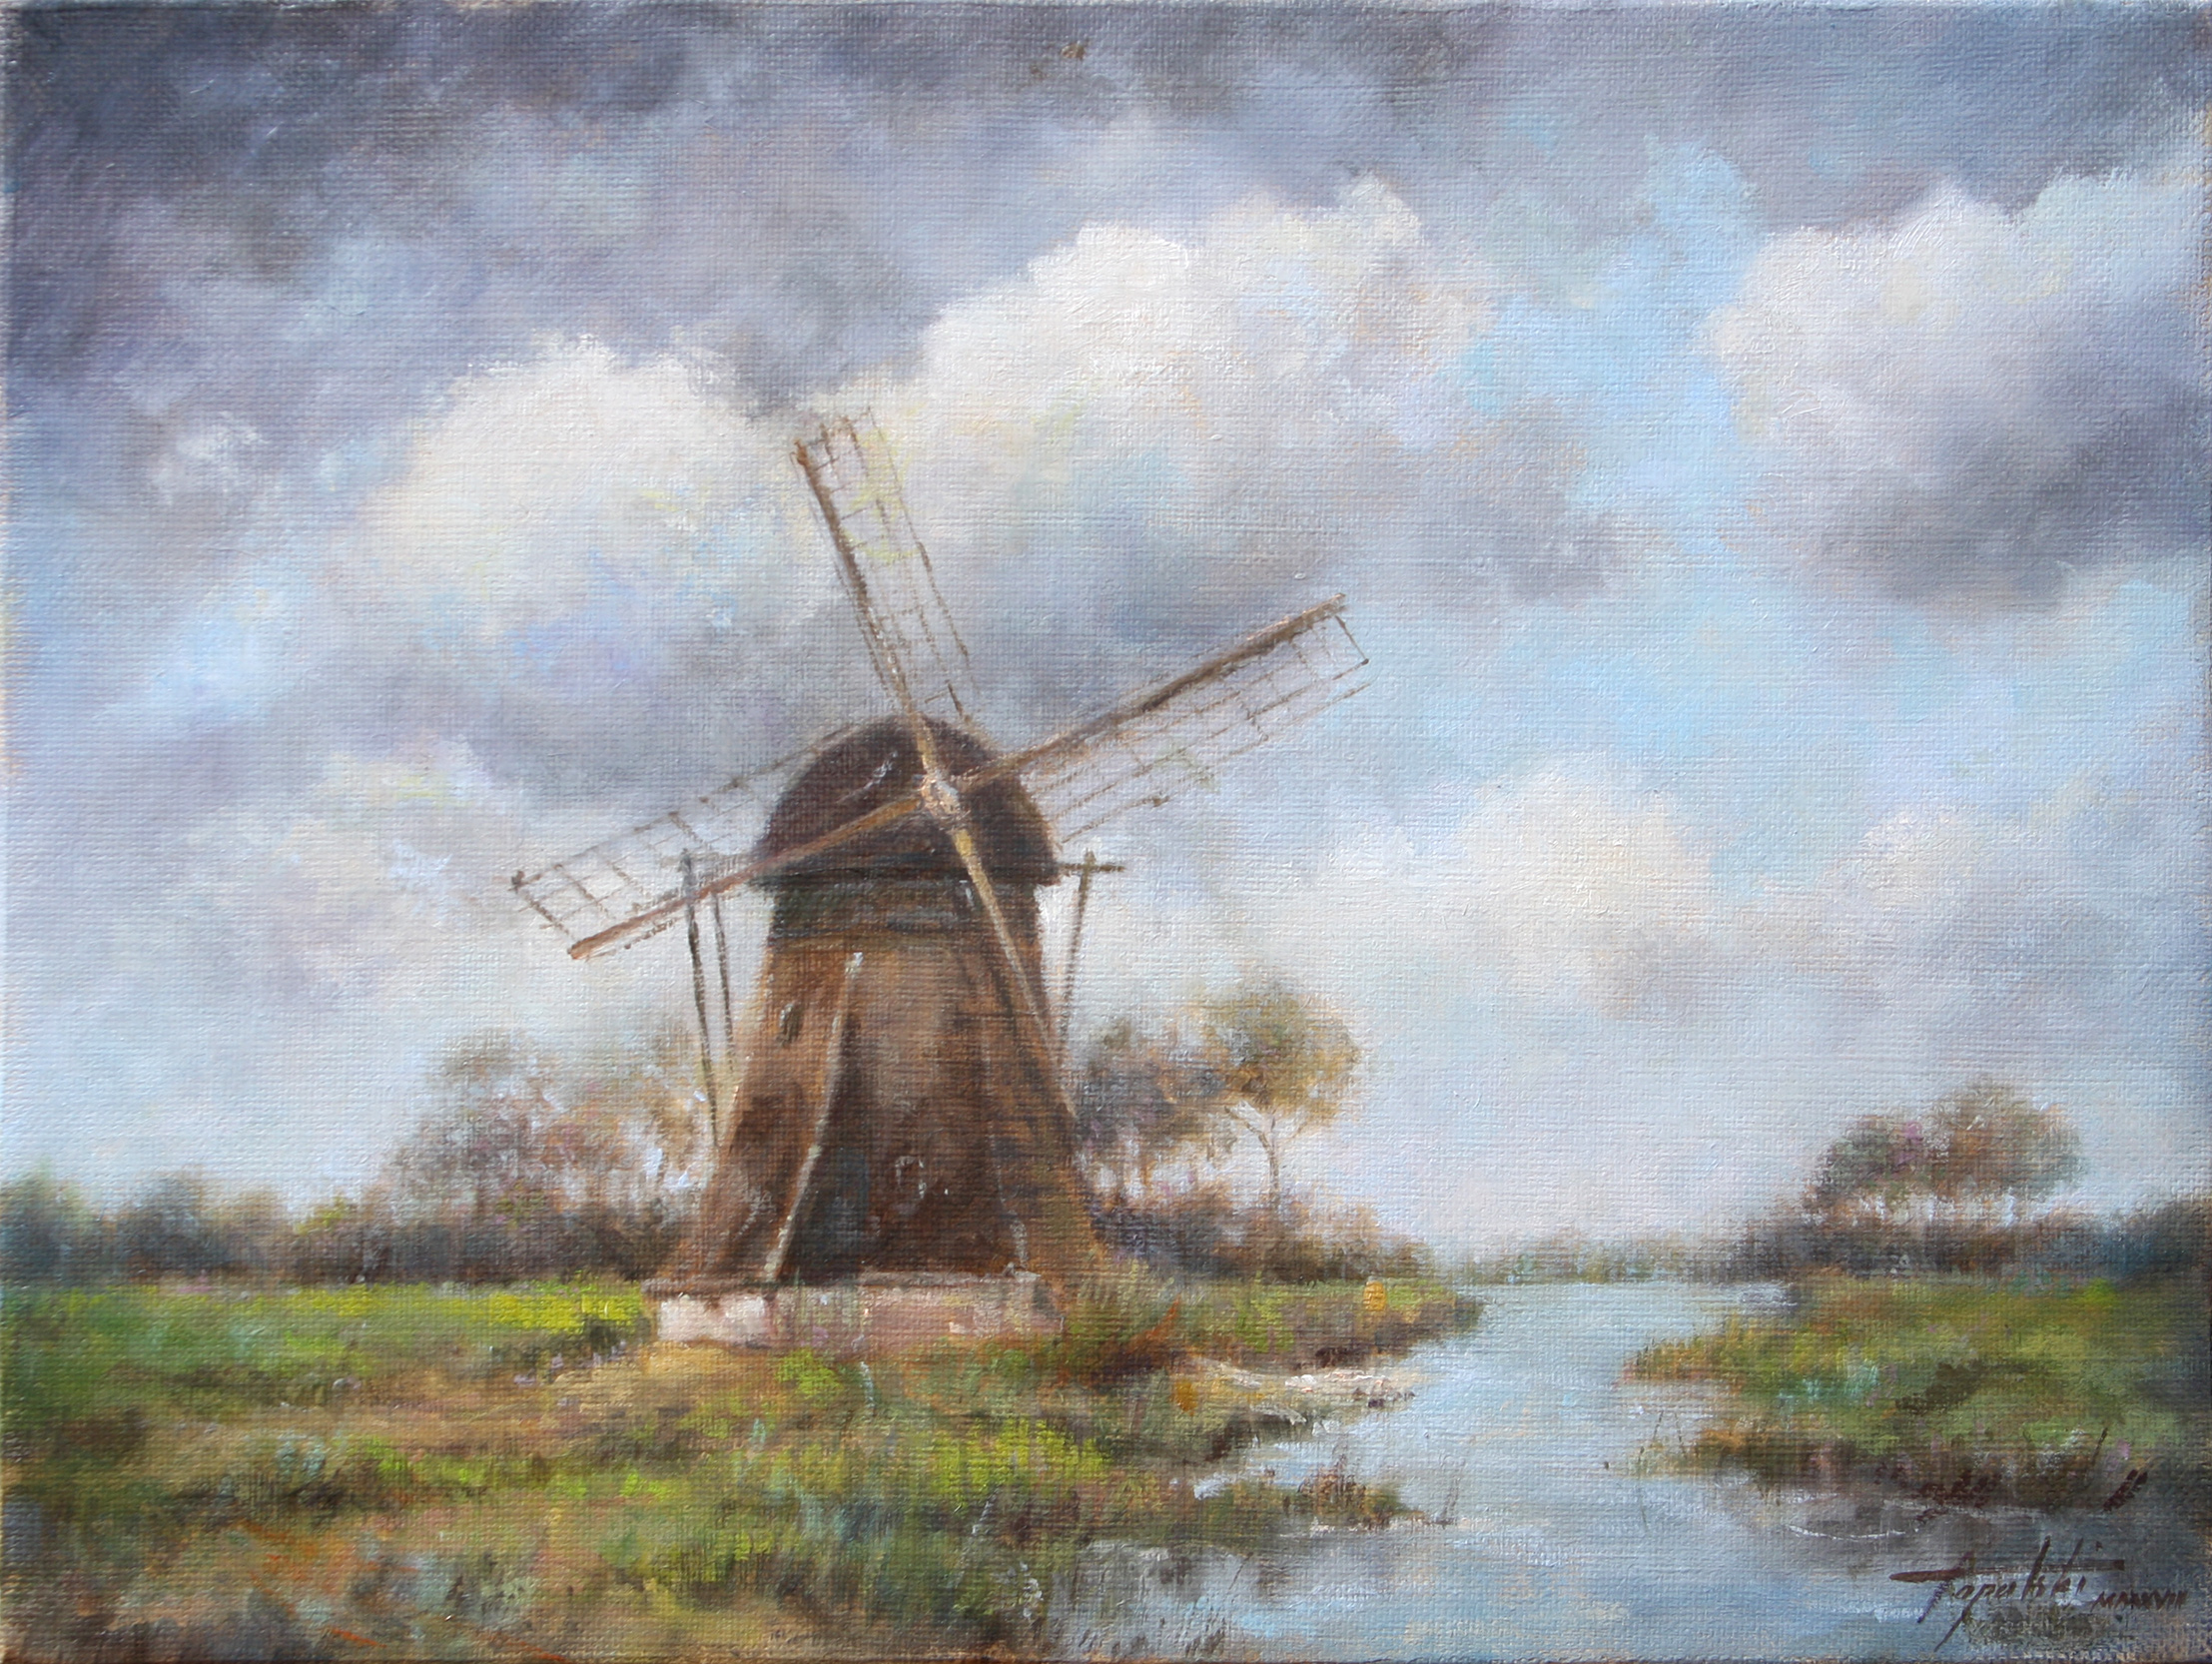 Oil Painting of a Windmill